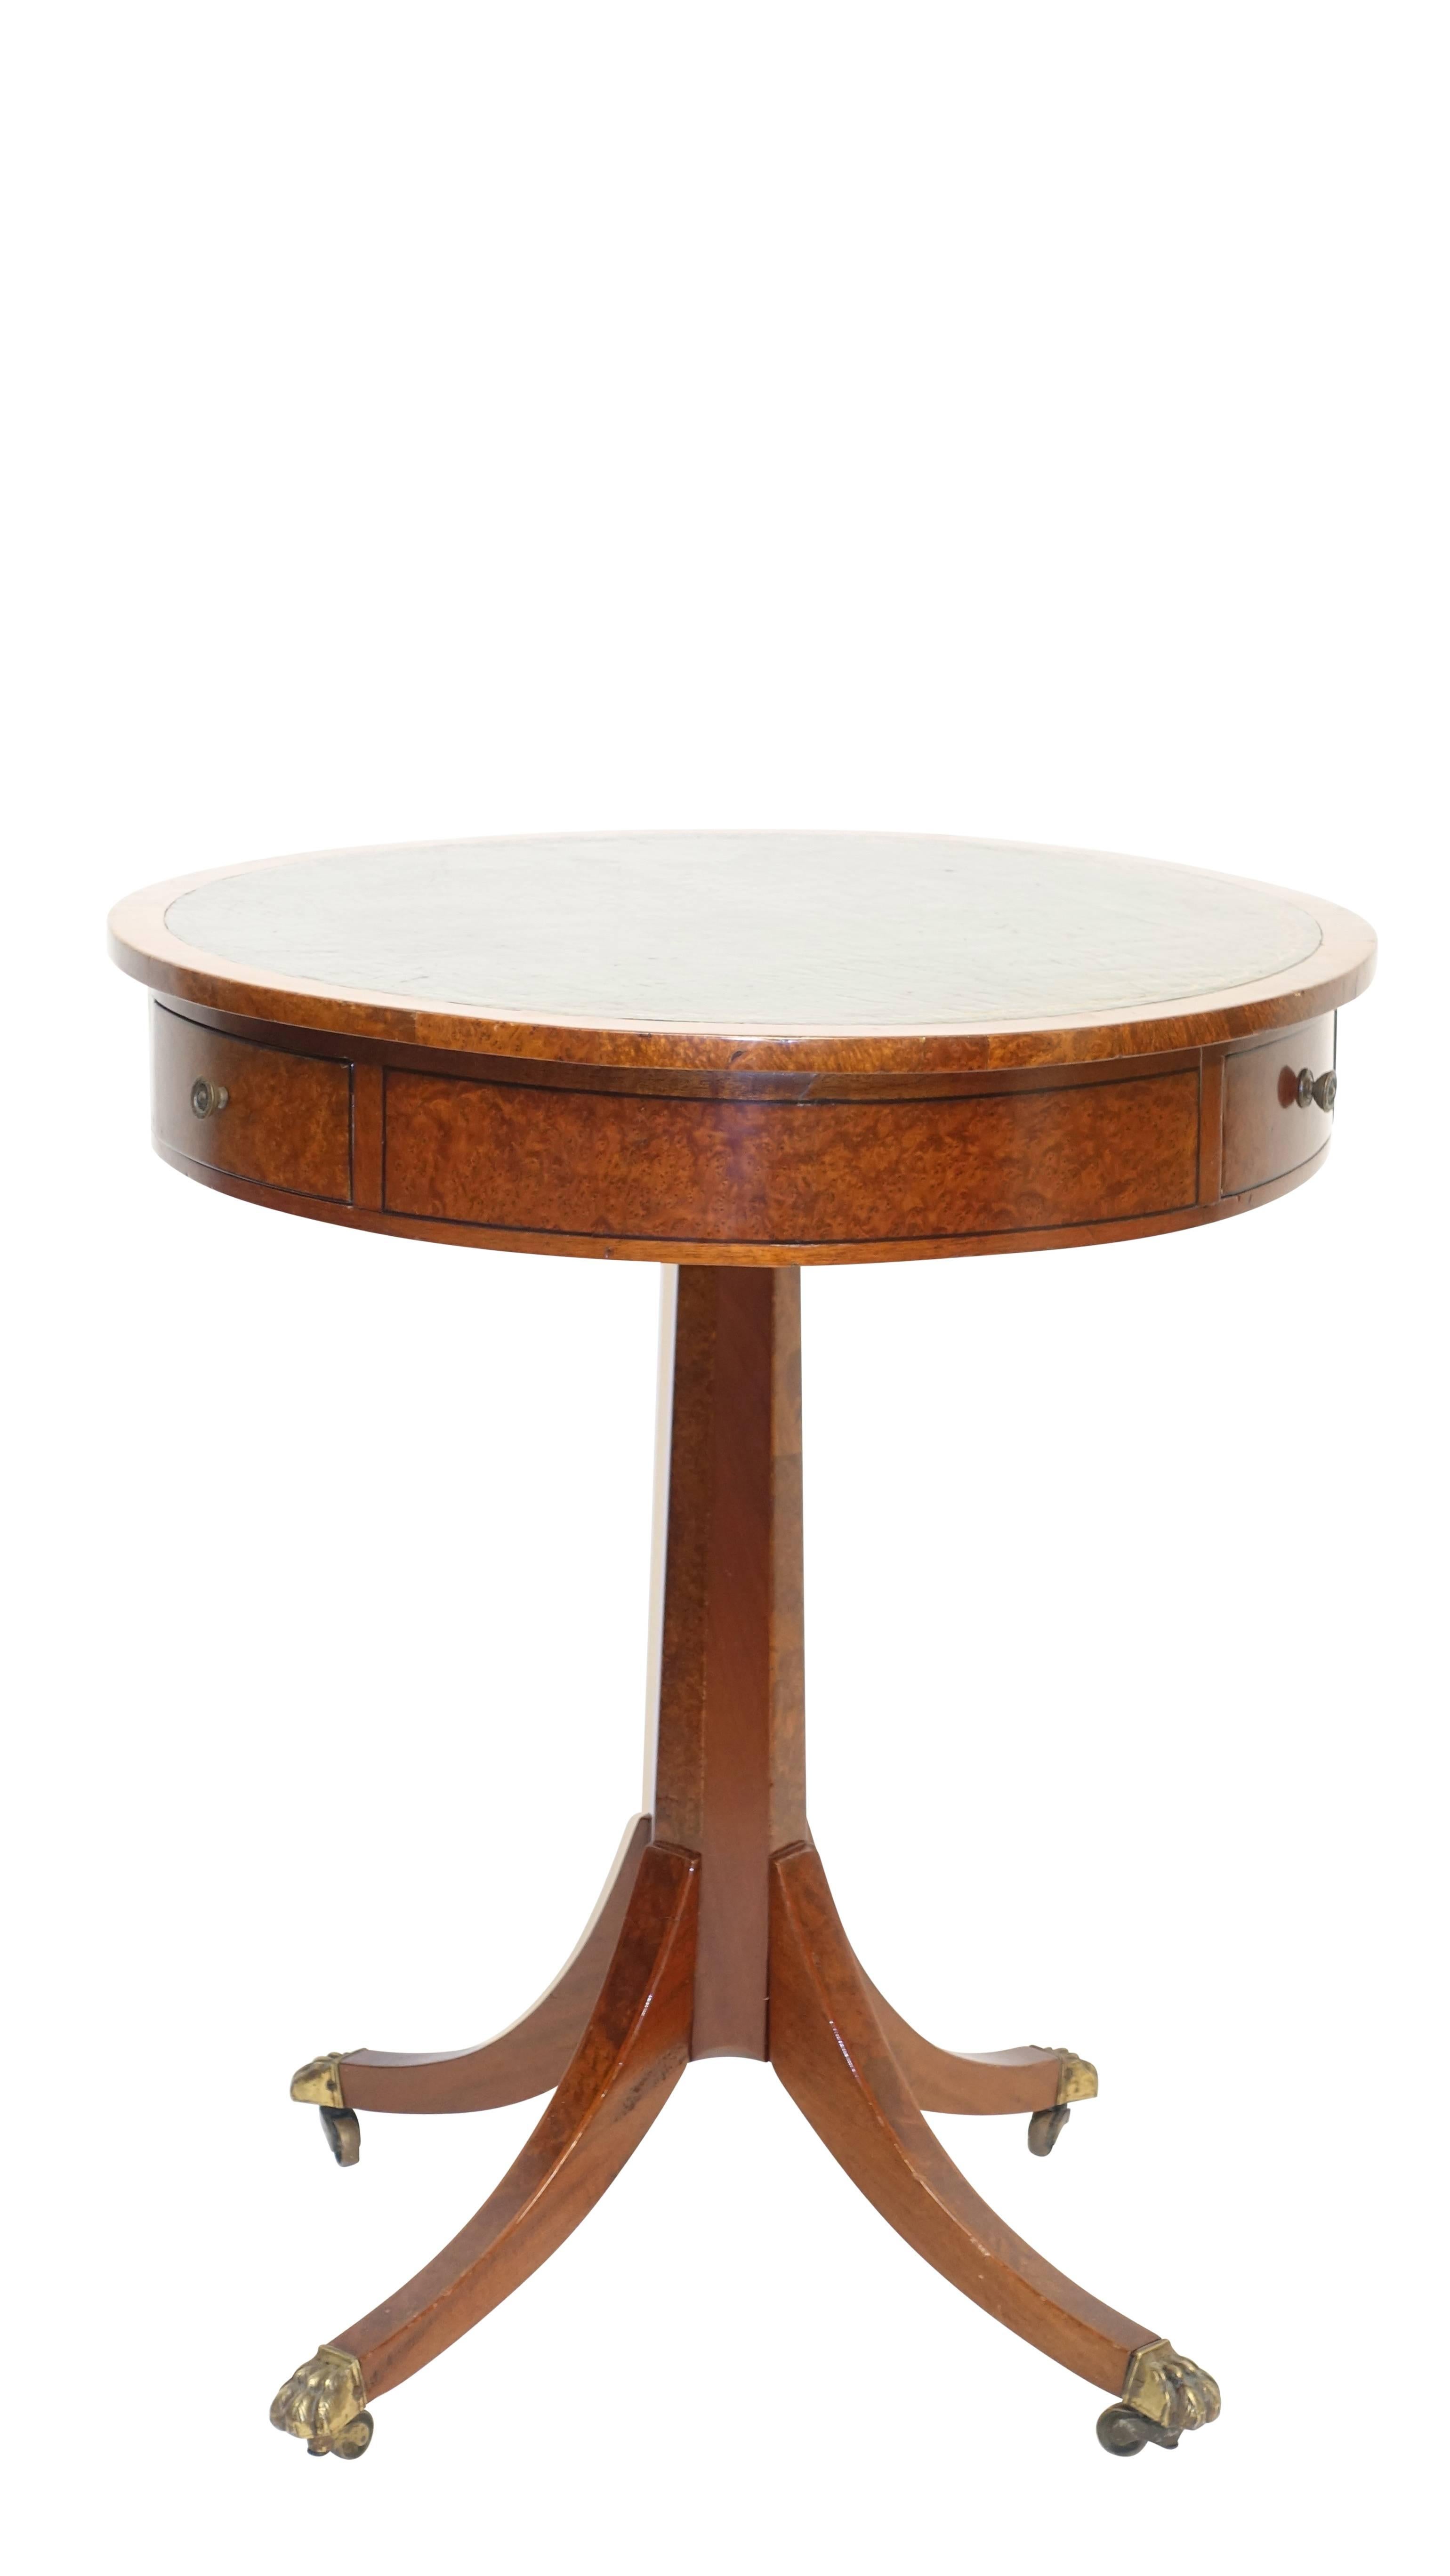 An unusual handmade Georgian style mahogany pedestal table with inset green leather surface. Having a revolving top with three short drawers set into the burled apron, standing on a single pedestal with splayed legs ending in brass lion paw feet